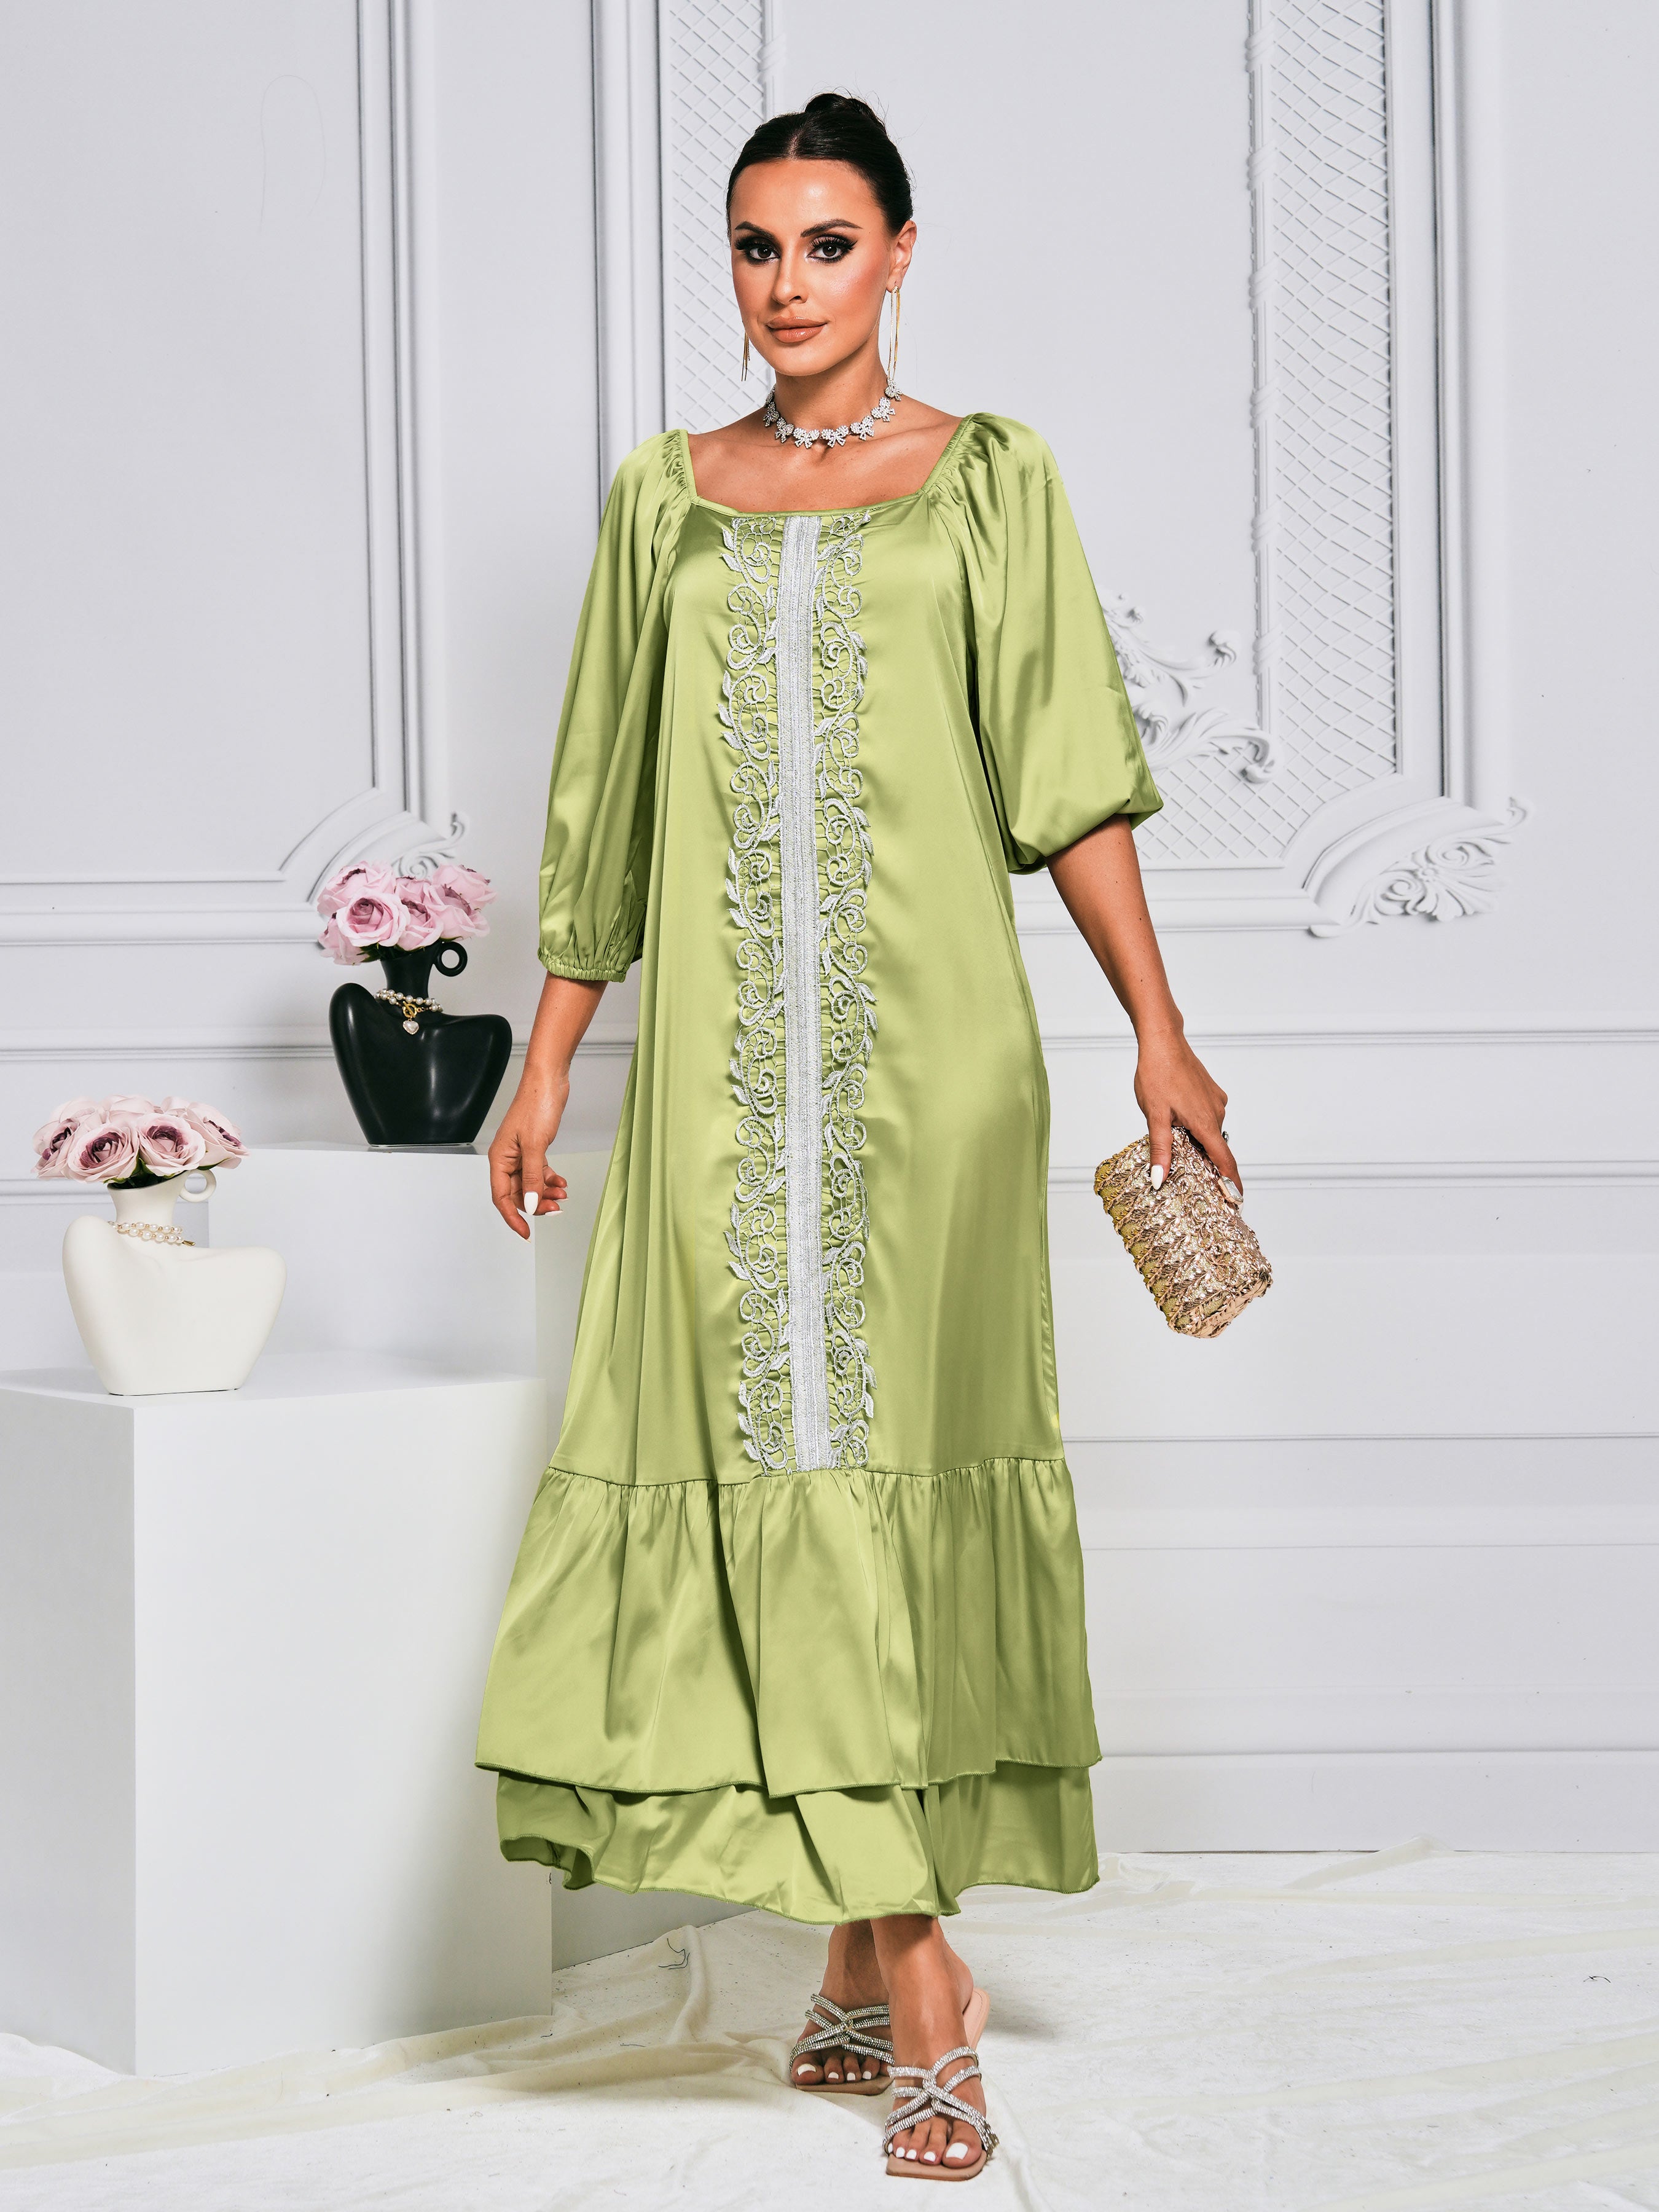 MISSORD Backless Embroidered Green Satin Dress